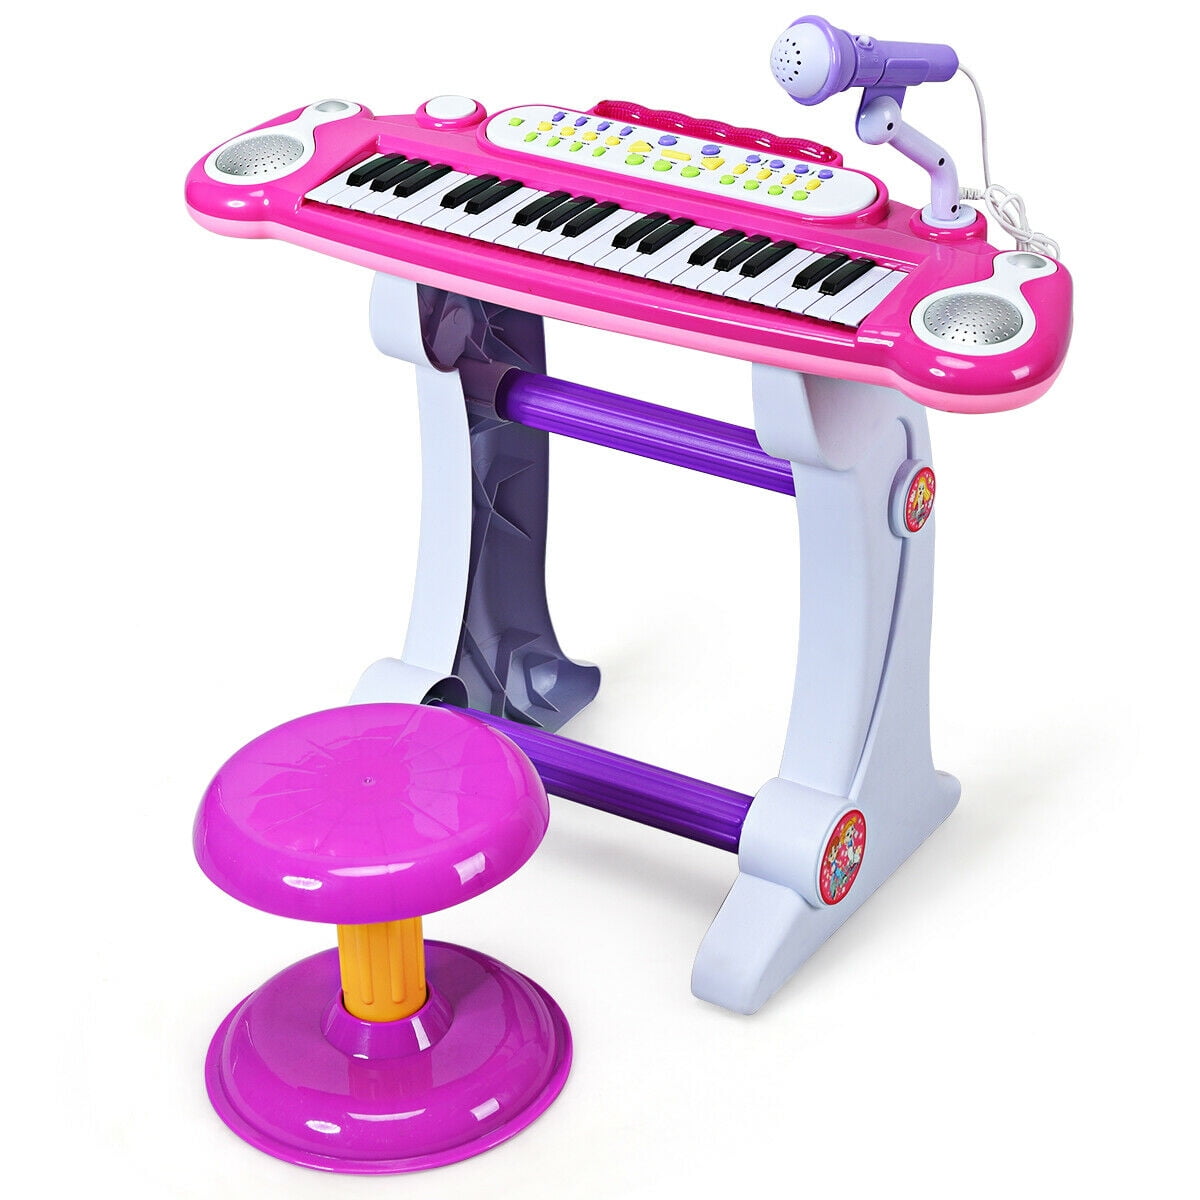 HQ Kids Tune Piano Musical Keyboard Organ Toy Tap Percussion Instrument 3p 